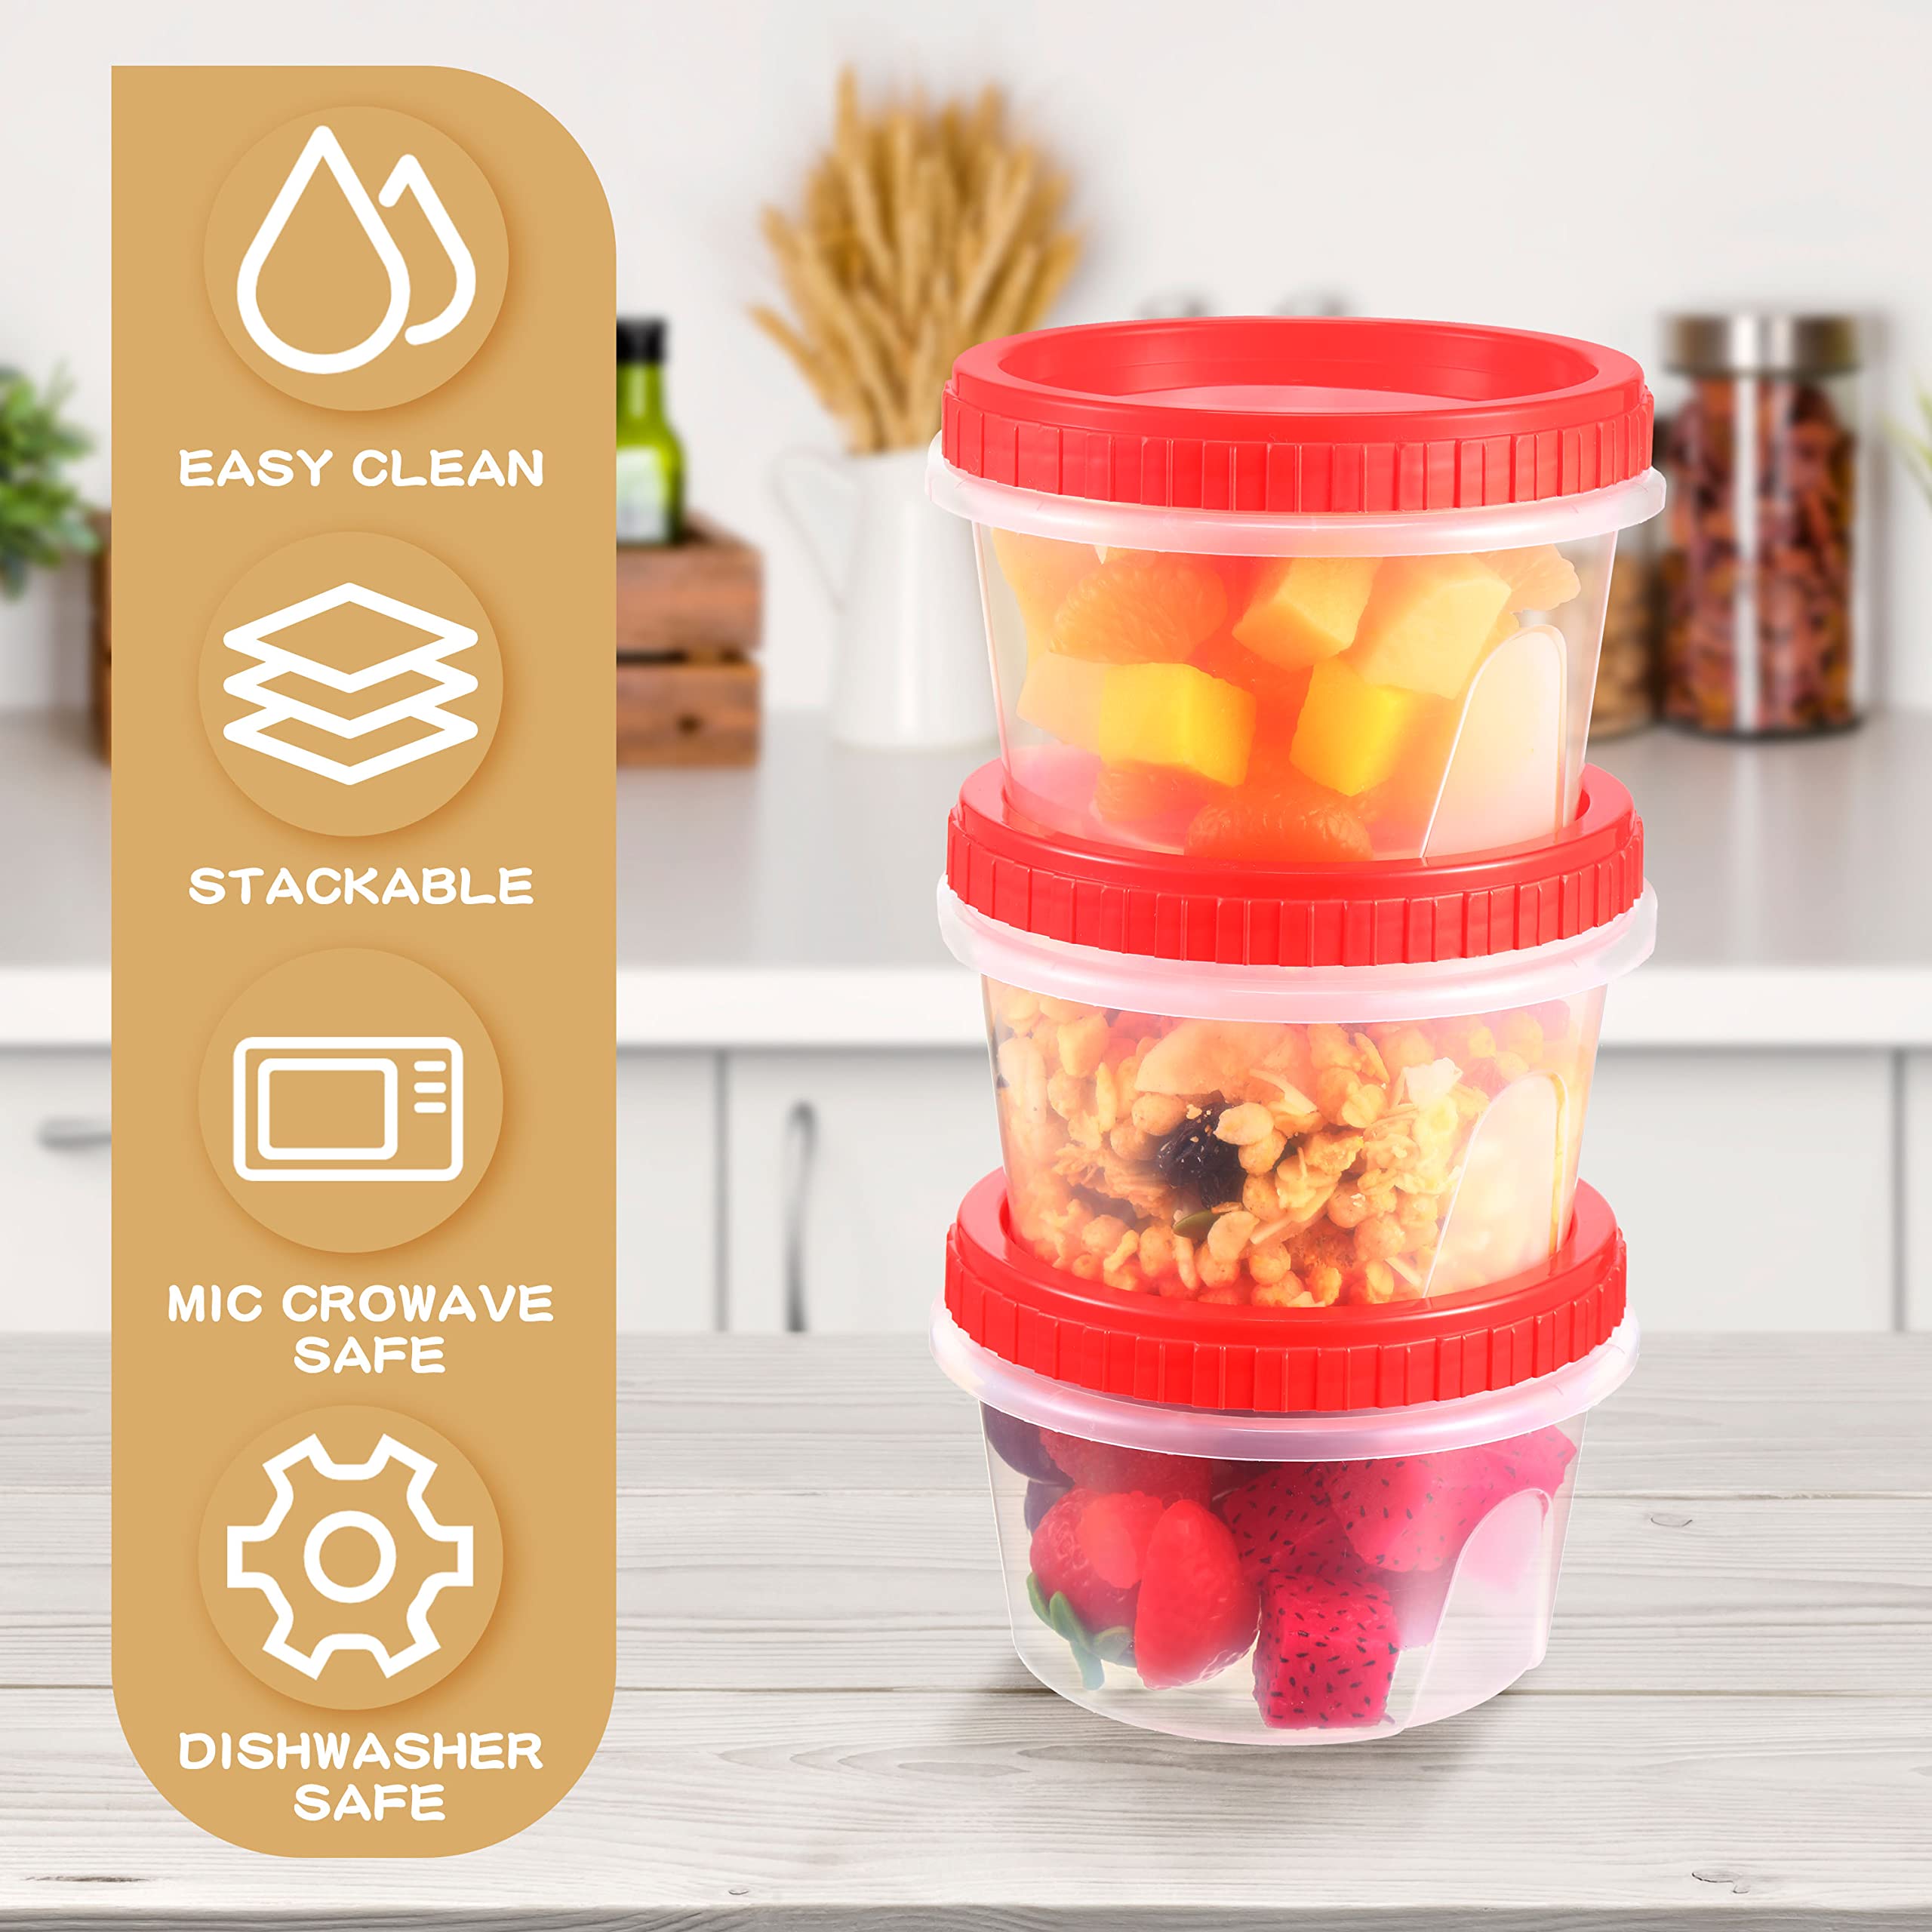 Mimorou 30 Pack Freezer Containers for Food 17 oz Twist Top Deli Storage Plastic Clear Bottom with Red Screw Reusable Stackable Overnight Oats Lids Lunch Fruit Soup Meal Portion